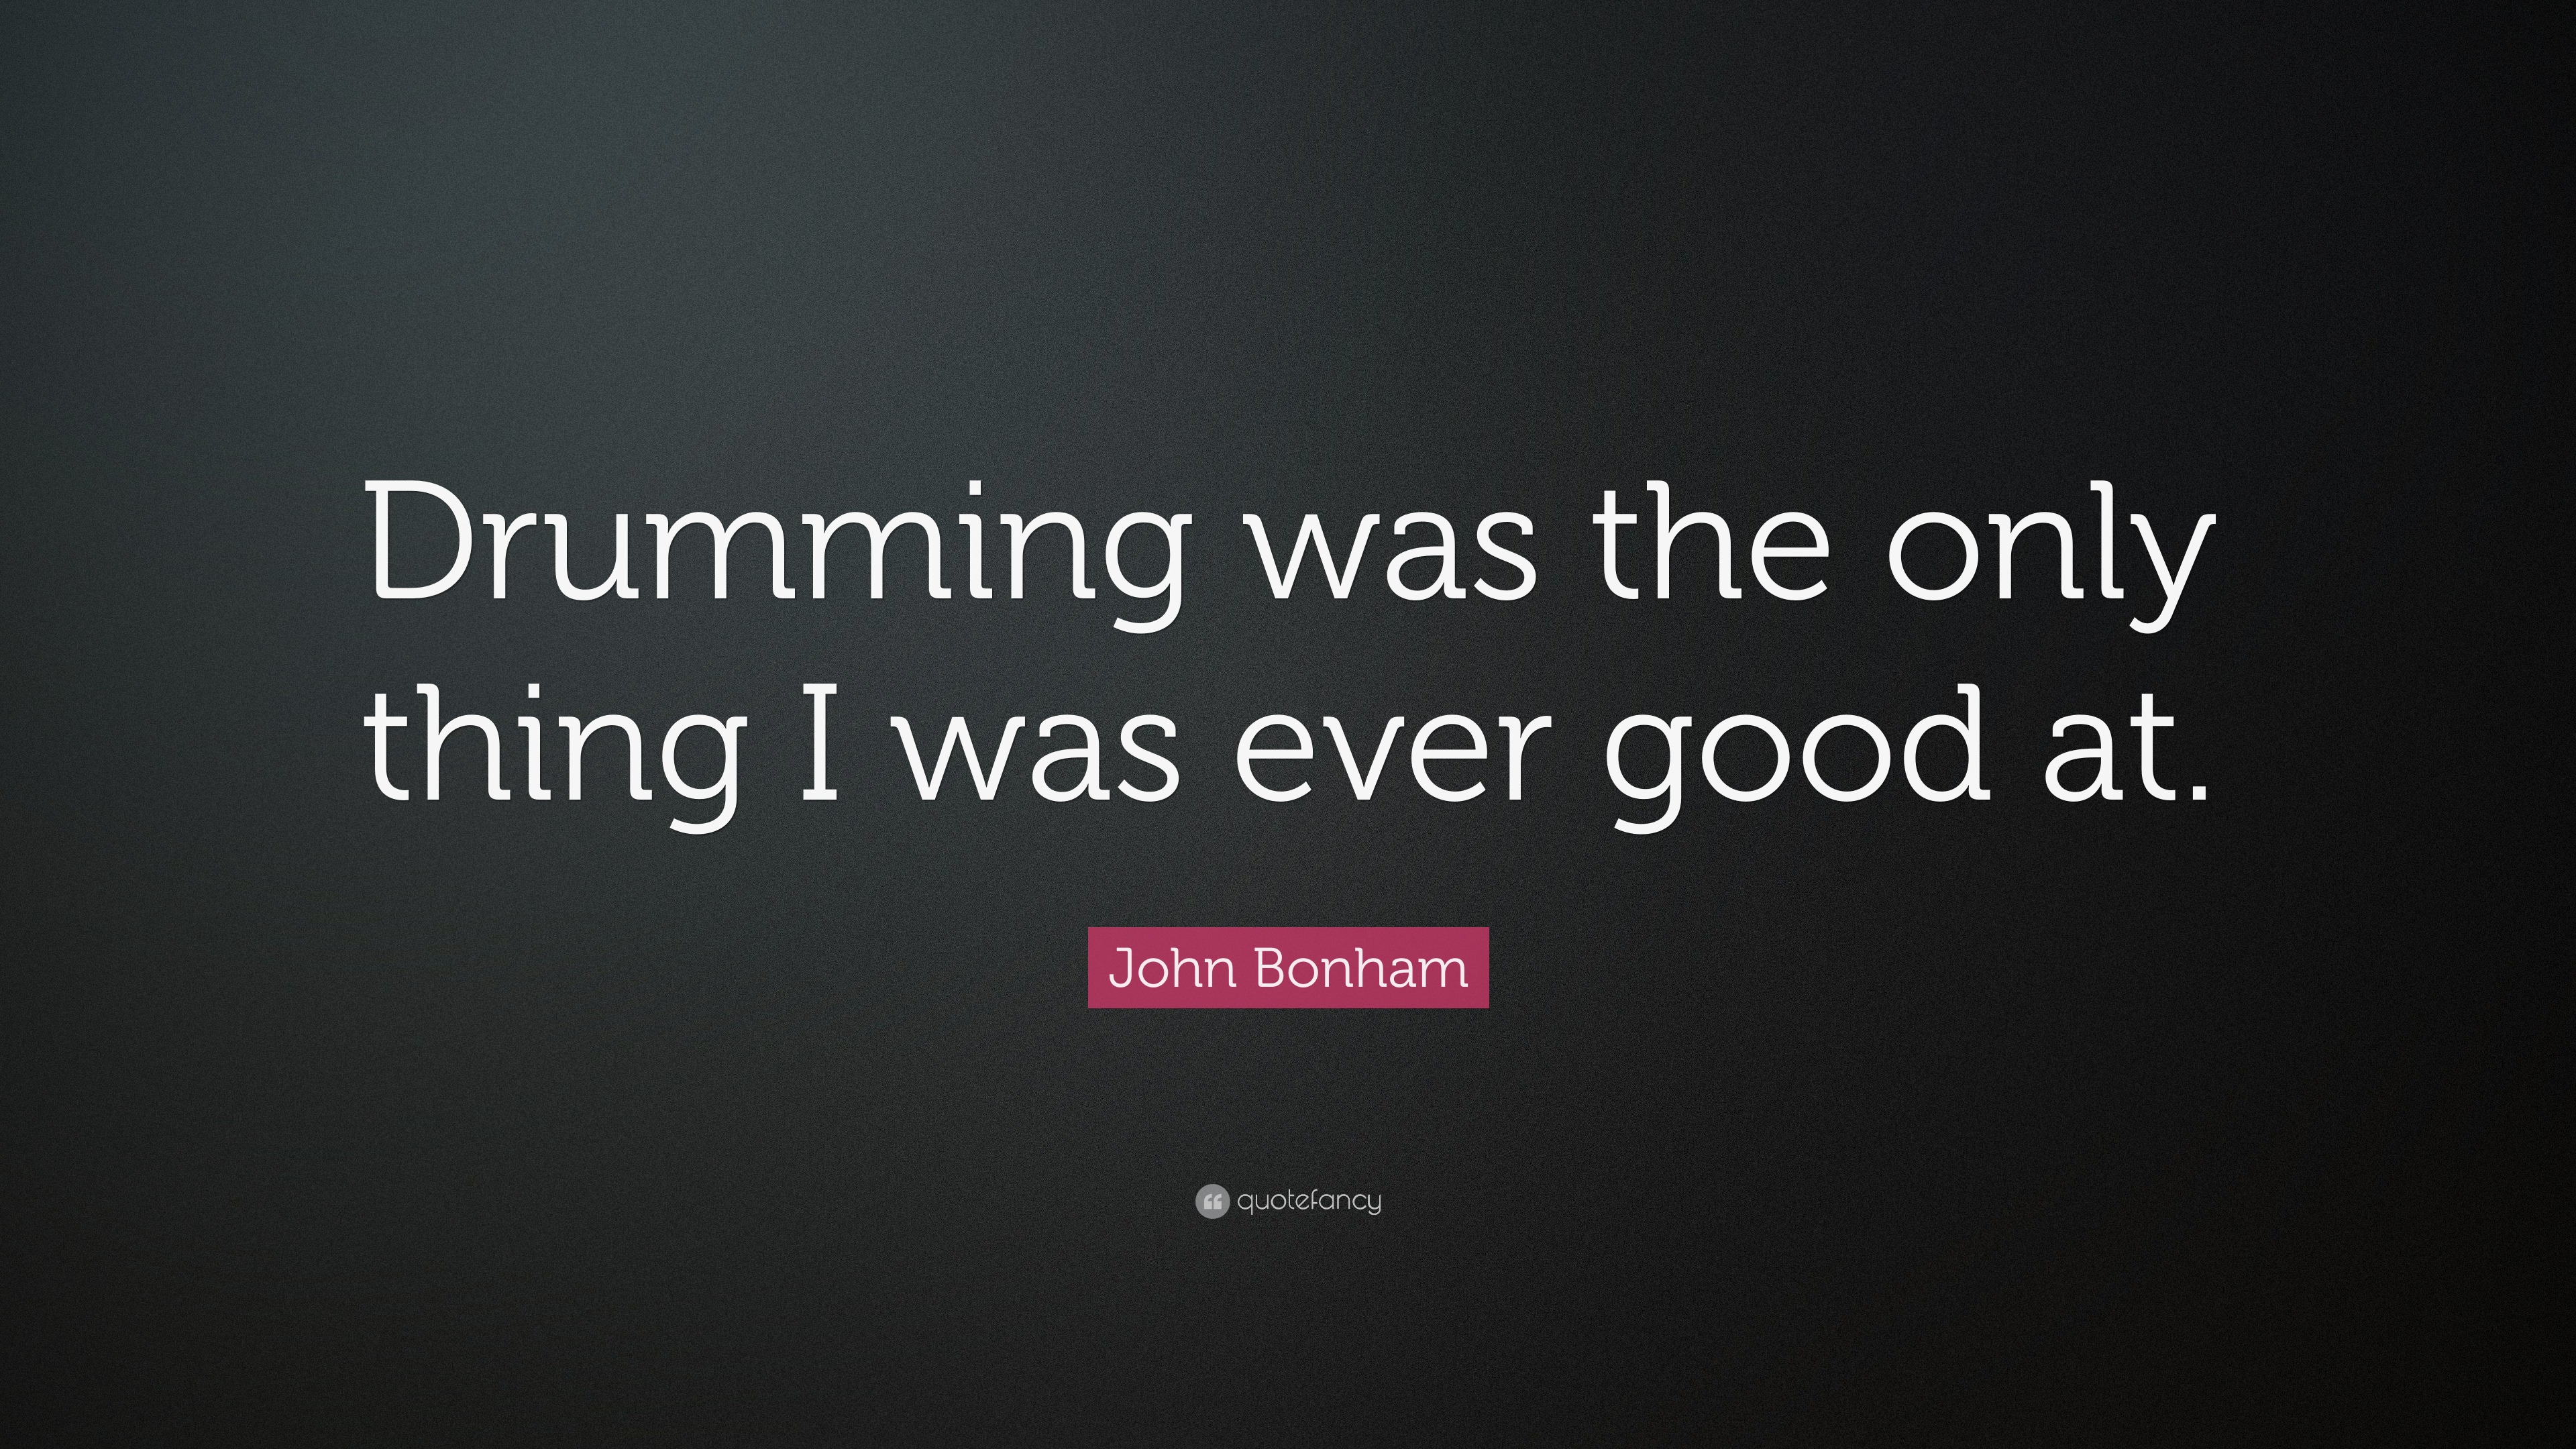 John Bonham Quote: “Drumming was the only thing I was ever good at.”